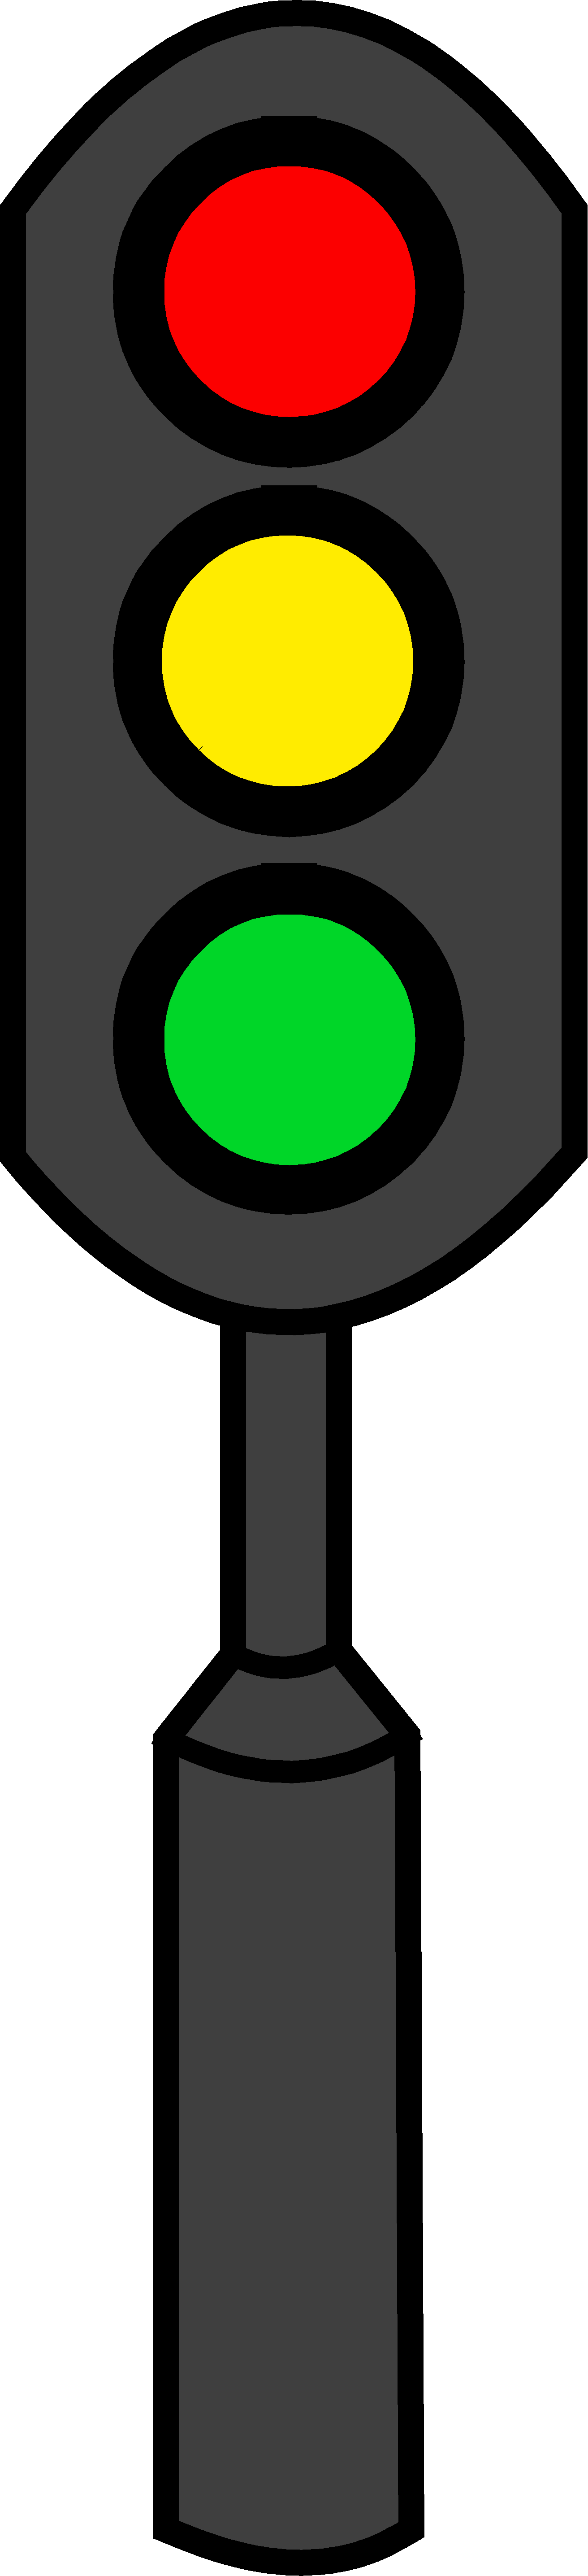 Stop Light Clip Art Images  Pictures - Becuo